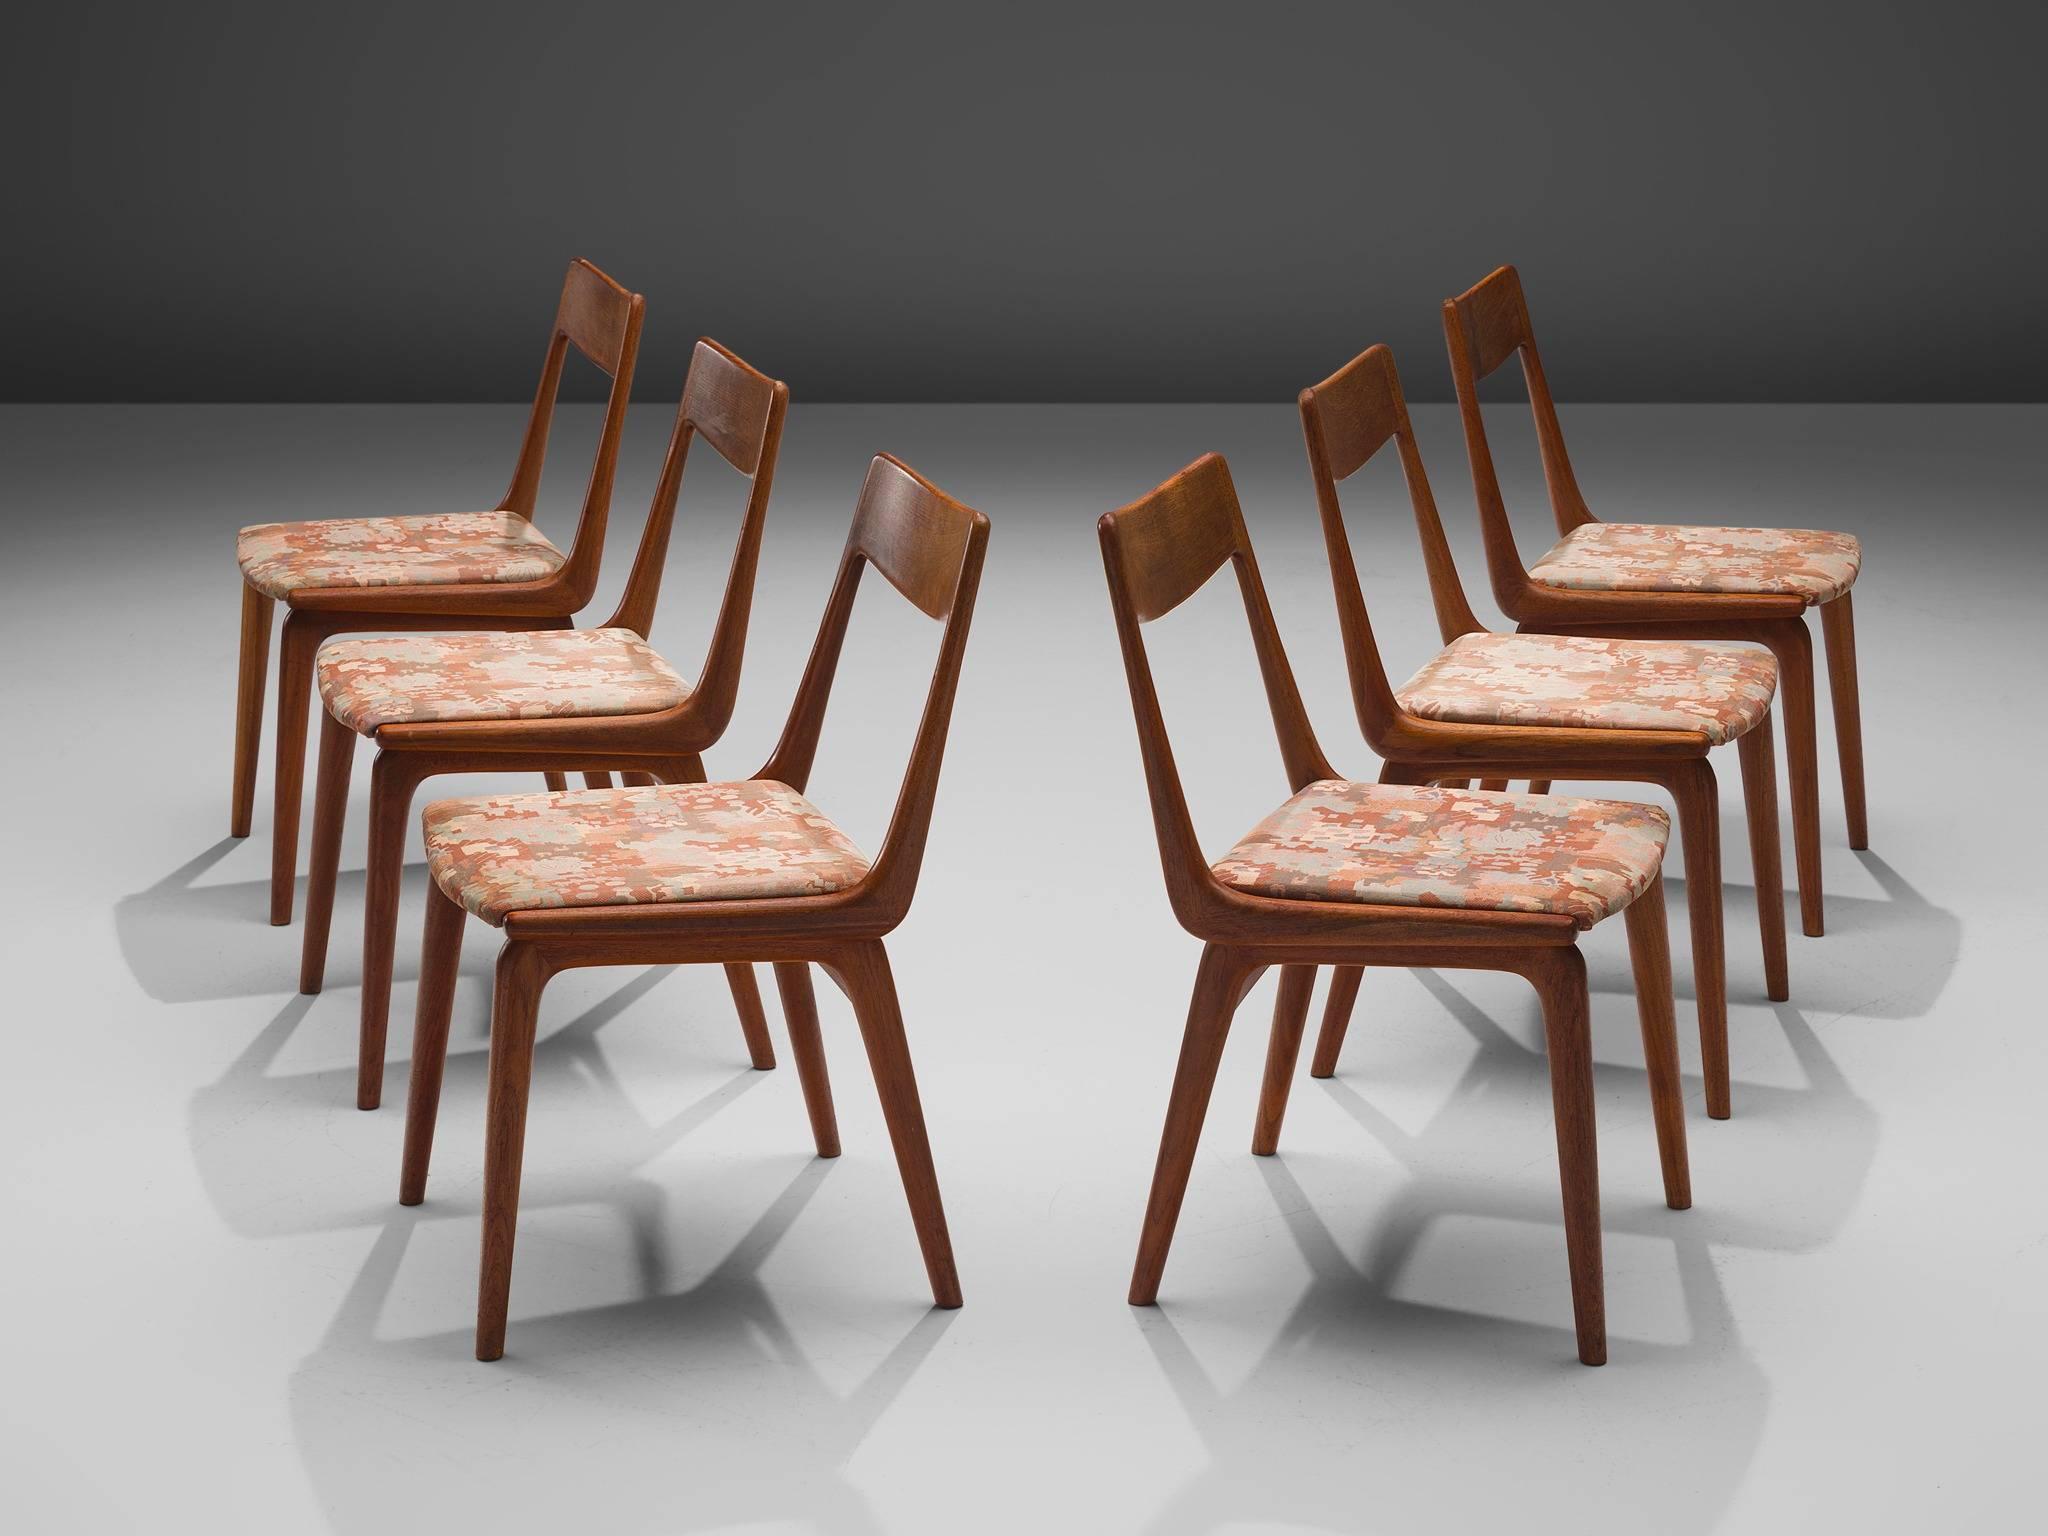 Erik Christiansen, set of six 'Boomerang' chairs, teak, fabric, Denmark, 1960s.

Clearly shaped chair with elegant legs. On the sides of the seating there is a boomerang shaped wood construction that ends in the backrest. The chairs seems to exist